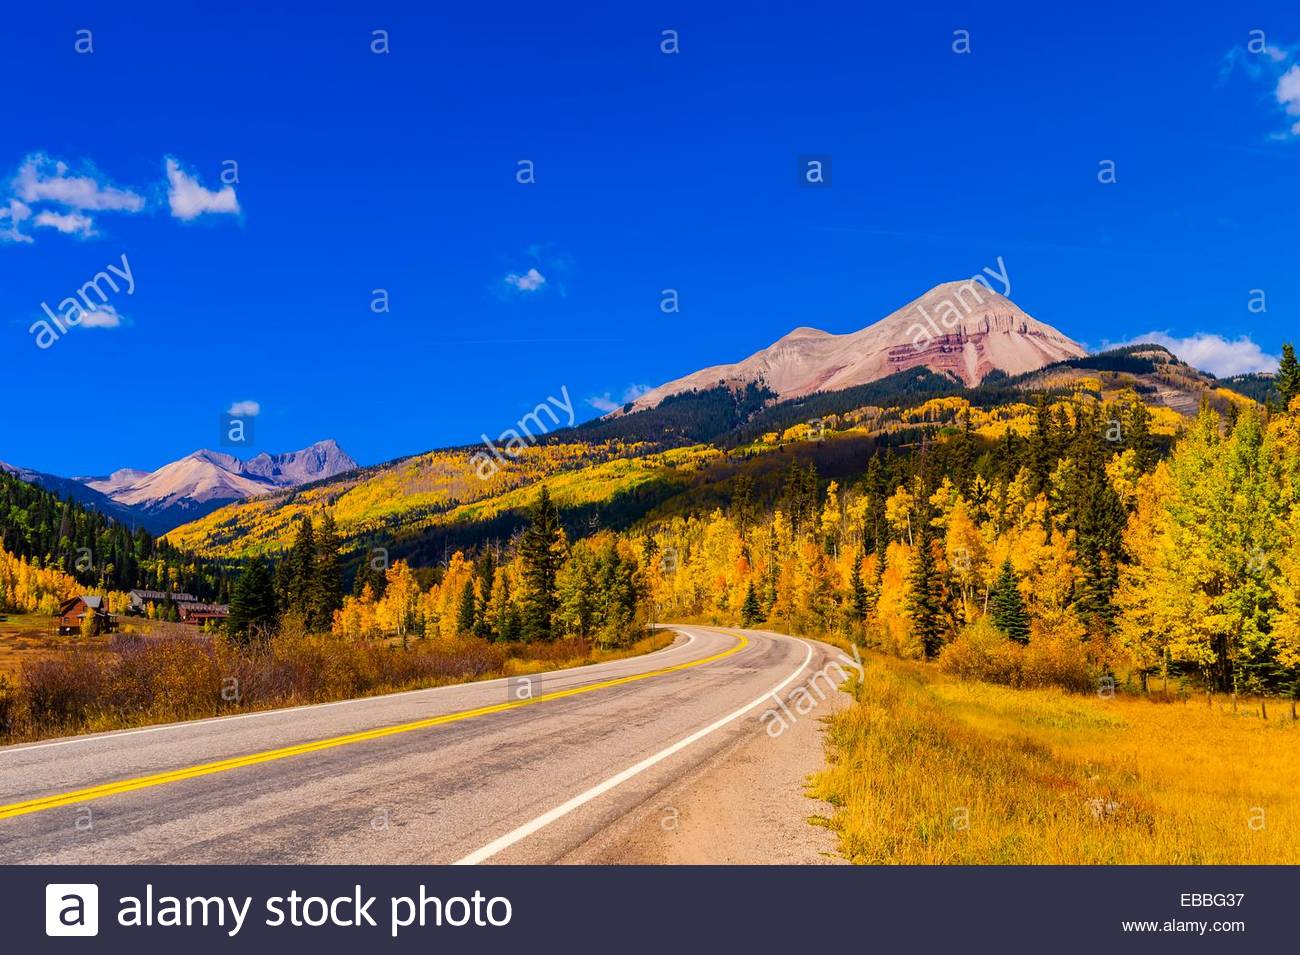 Fall Color Colorado Highway Engineer Mountain In Background